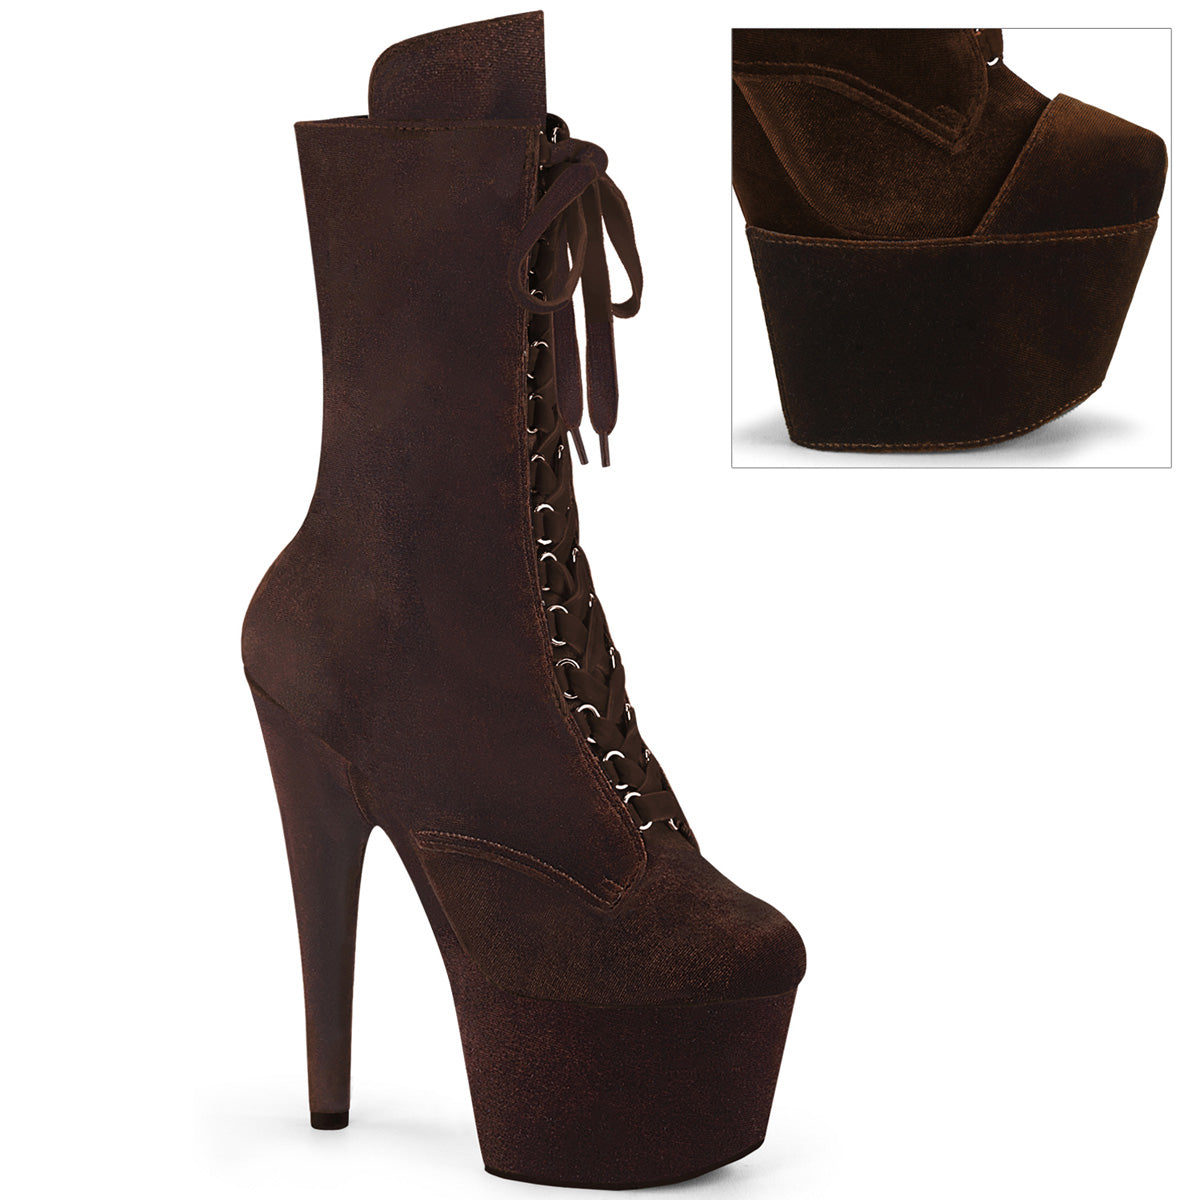 ADORE-1045VEL Velvet Lace-Up Ankle Boot